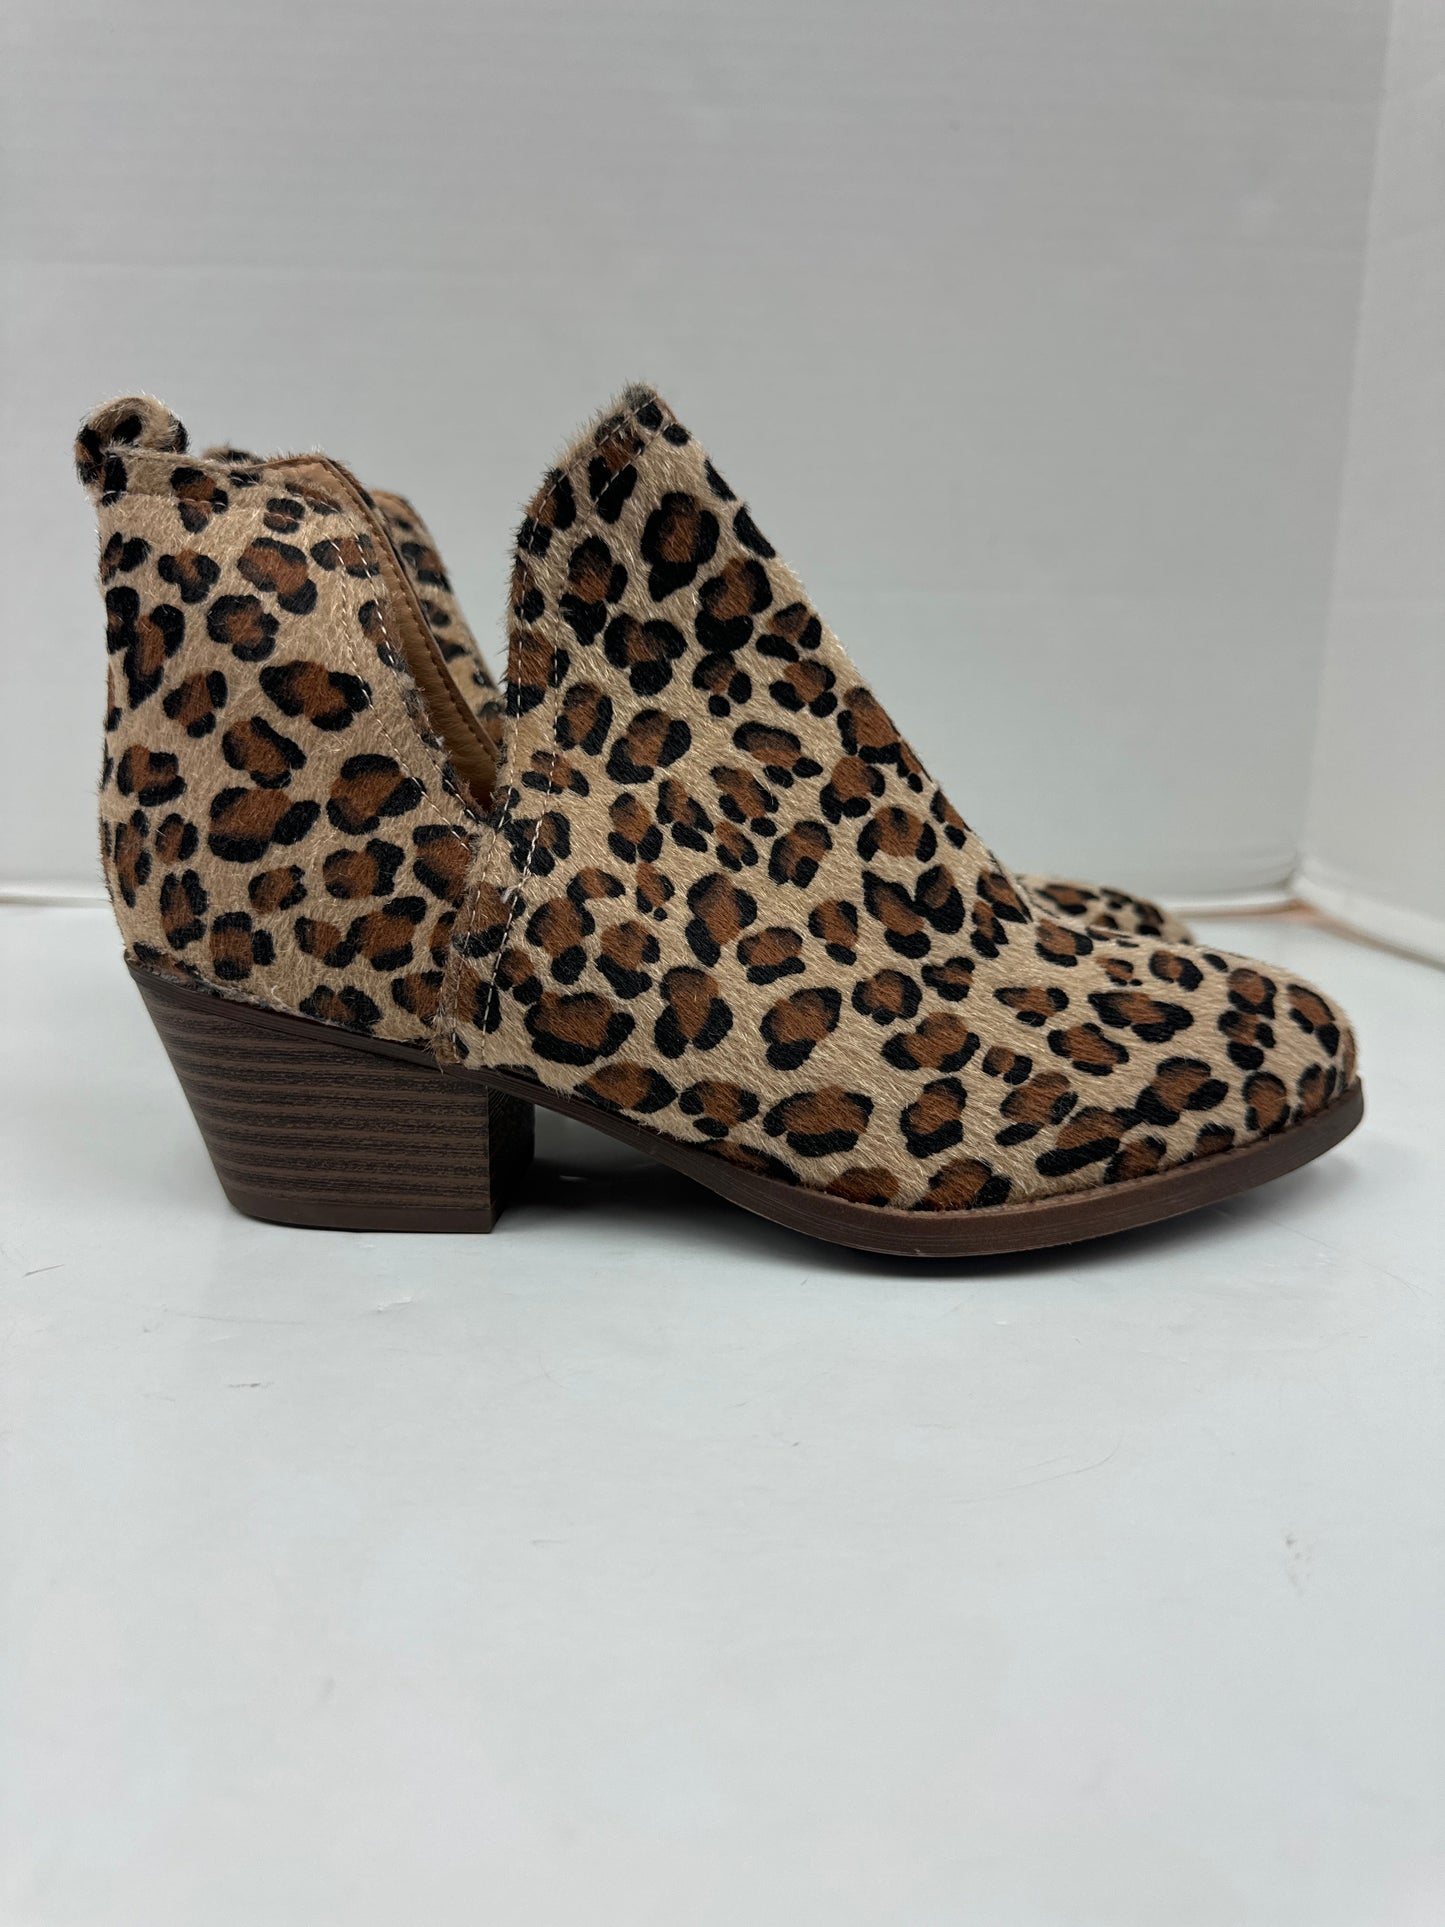 Animal Print Boots Ankle Heels Cl By Chinese Laundry, Size 5.5